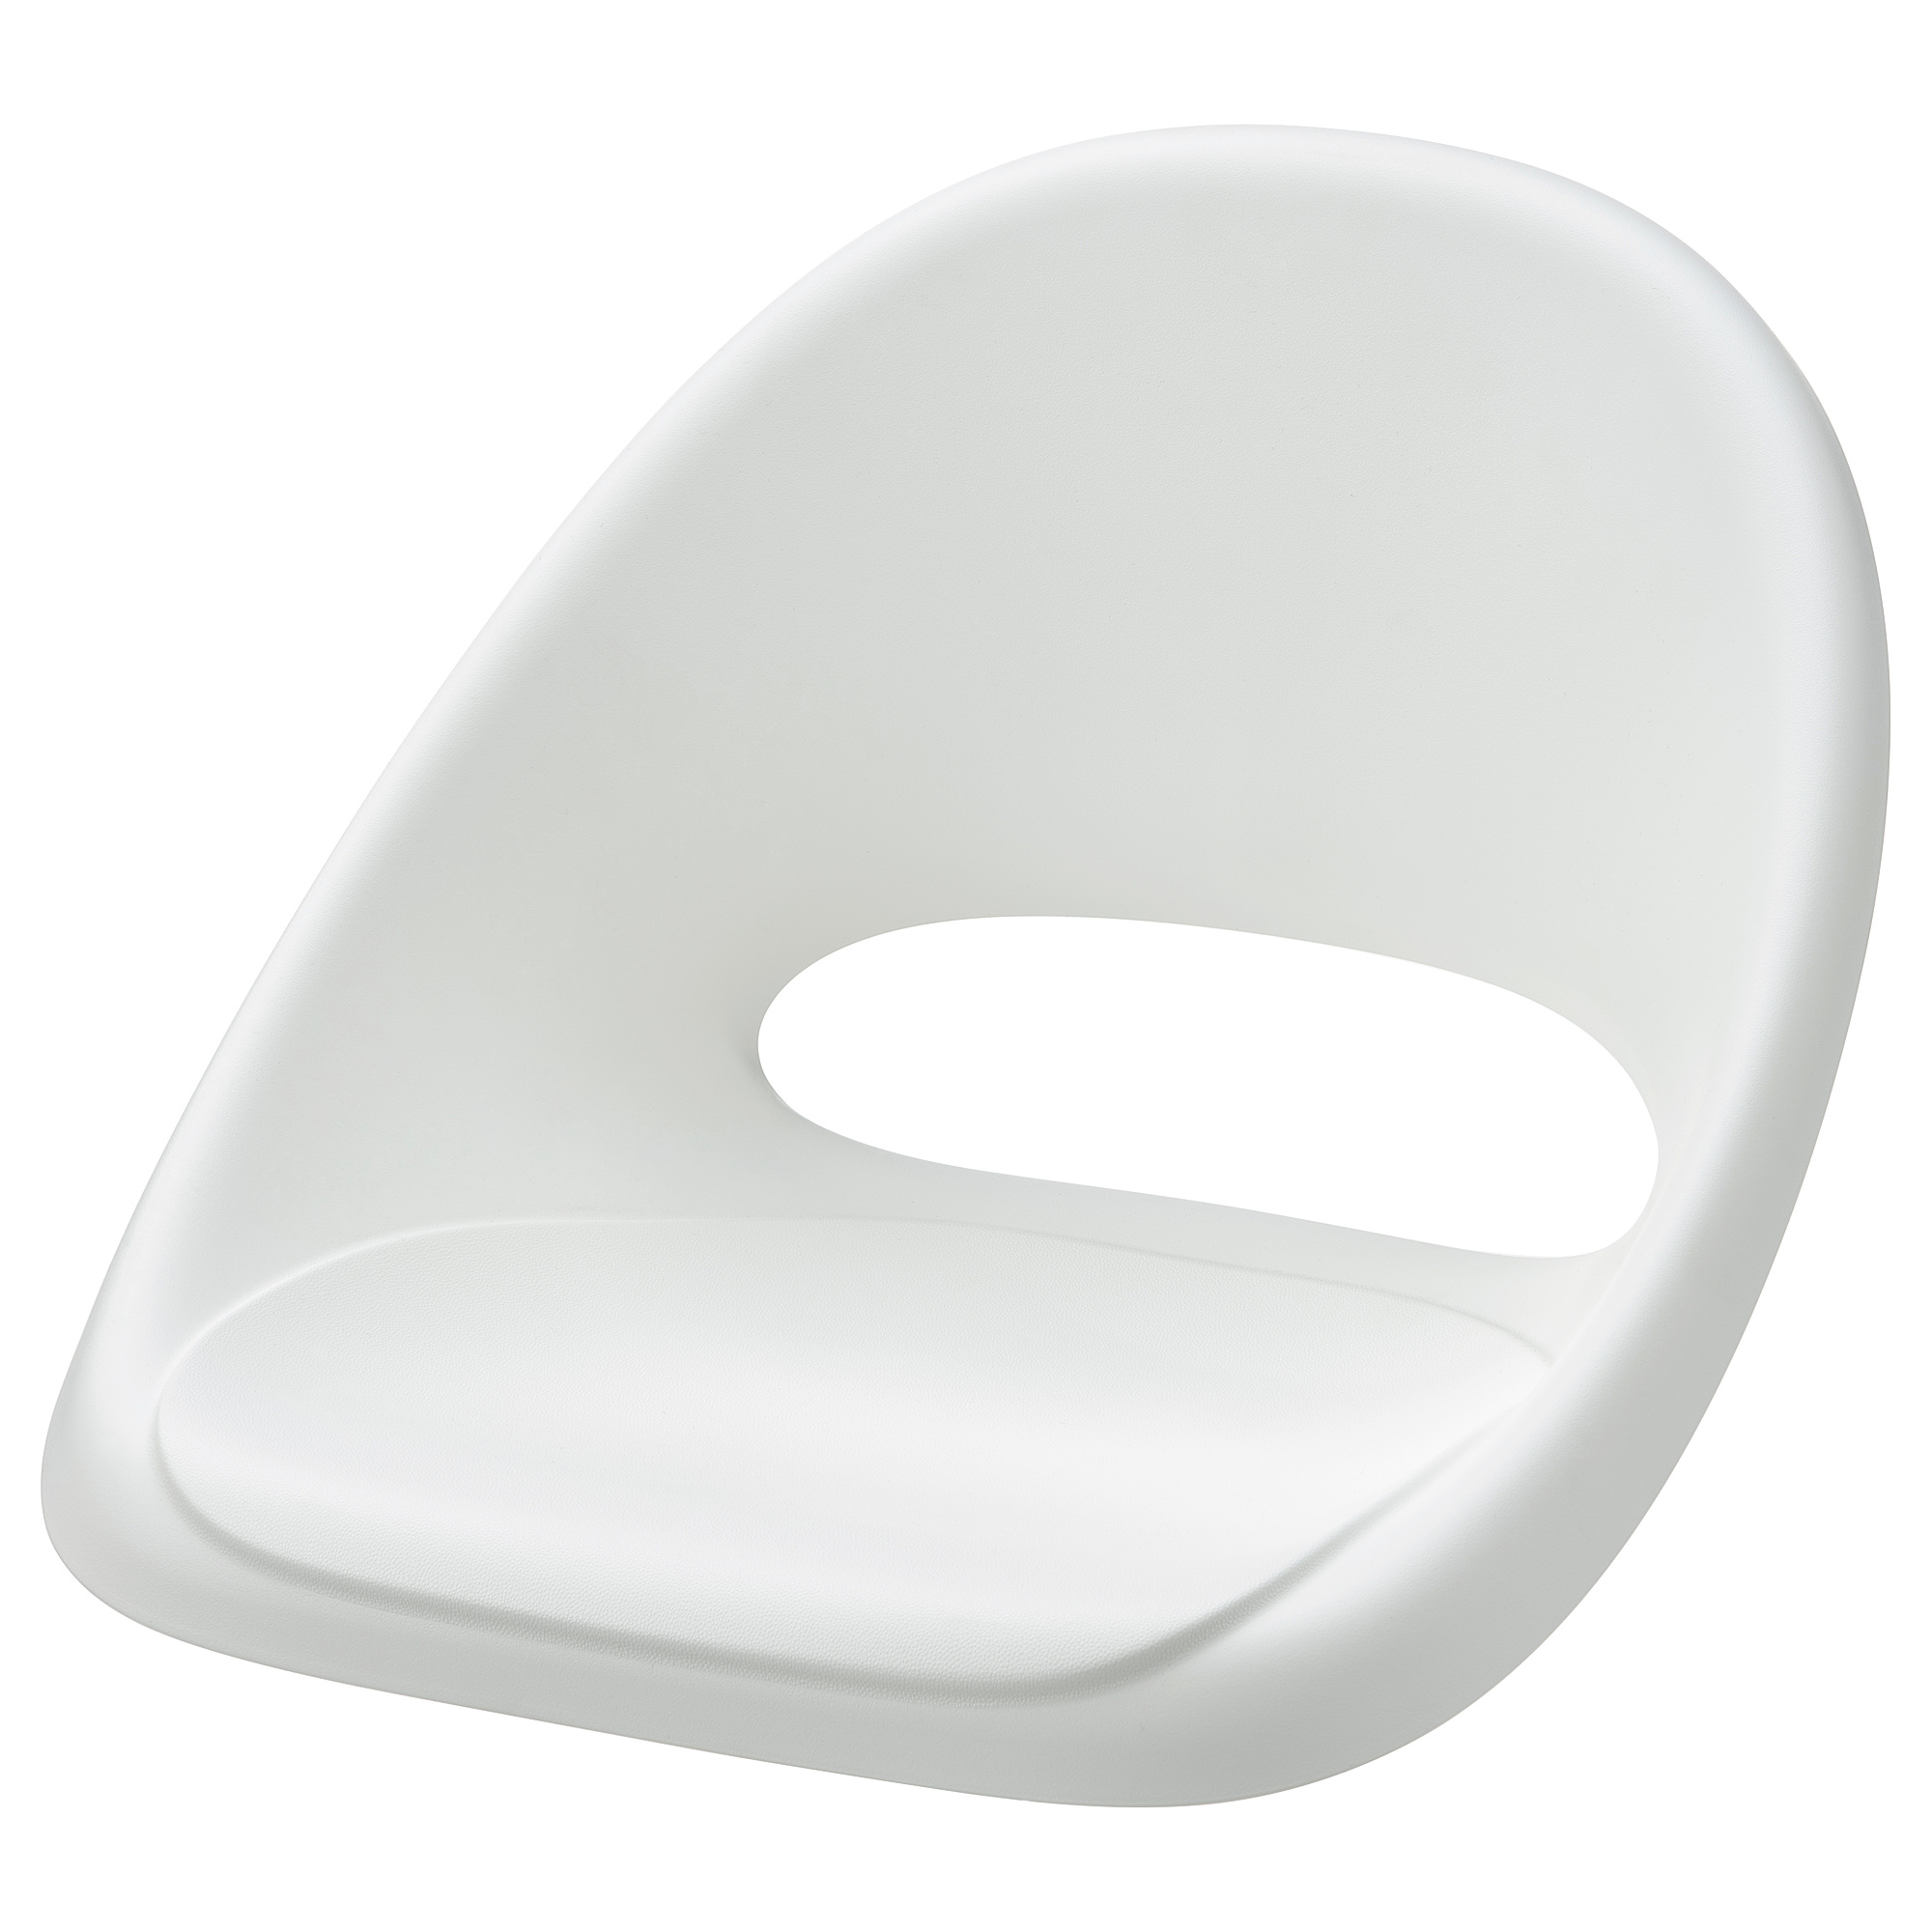 LOBERGET seat shell for junior chair